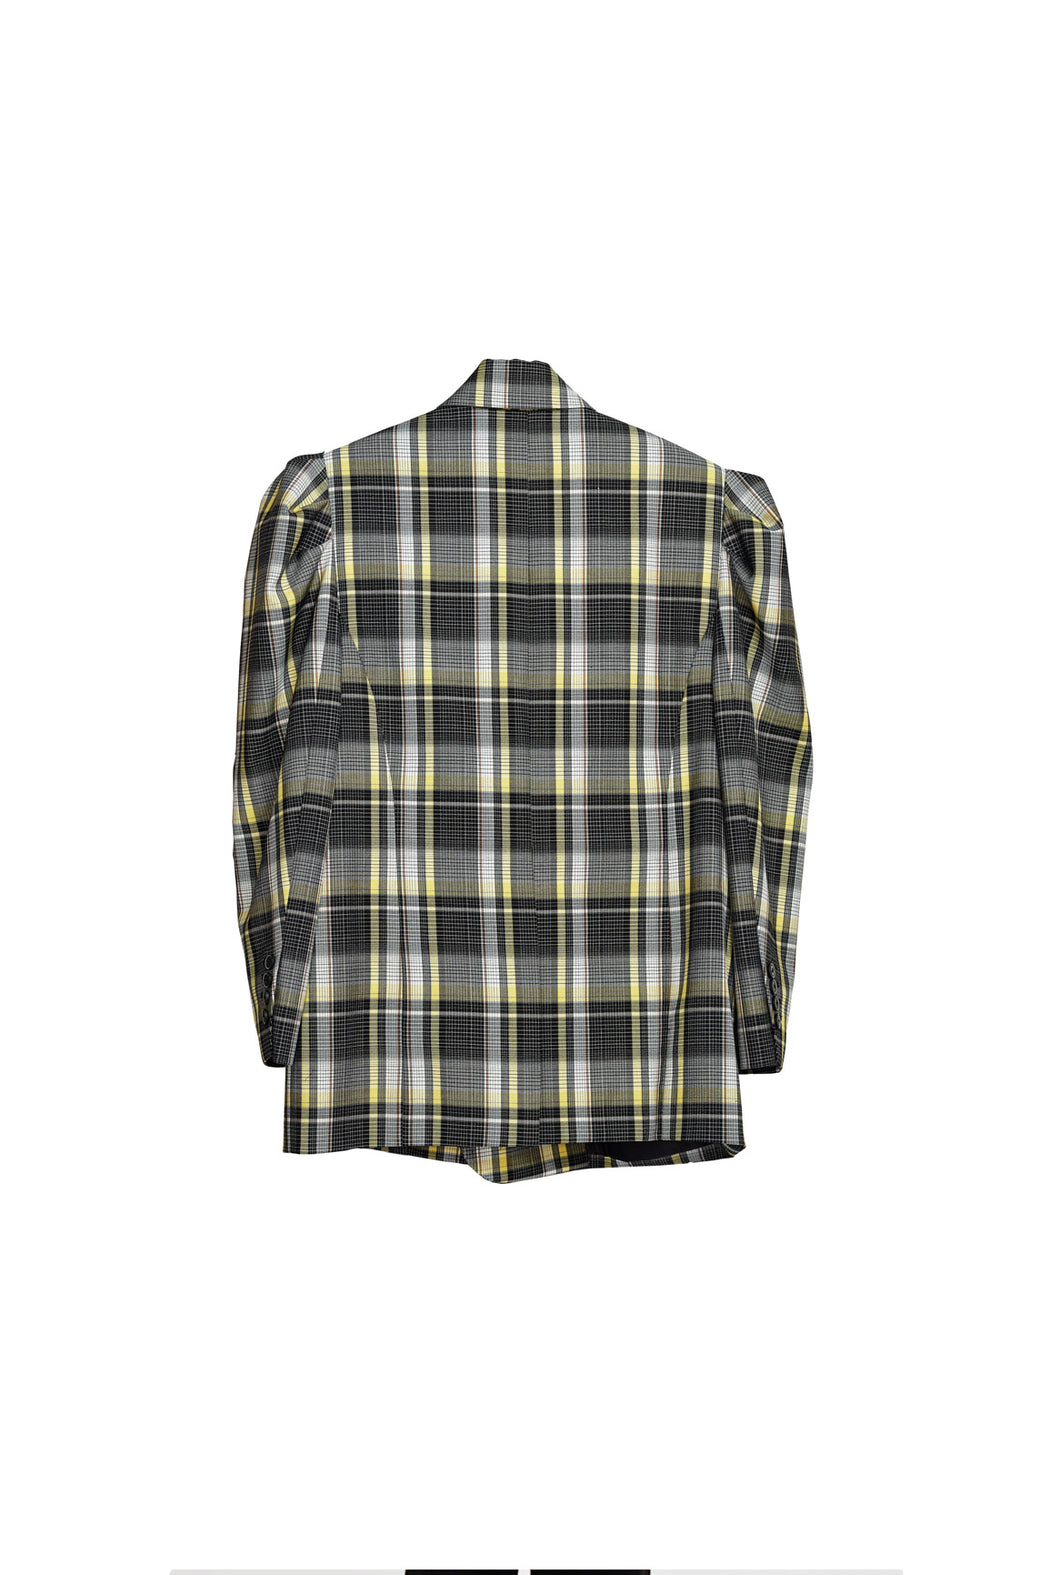 Double Breasted Button Jacket - Tartan Check Black